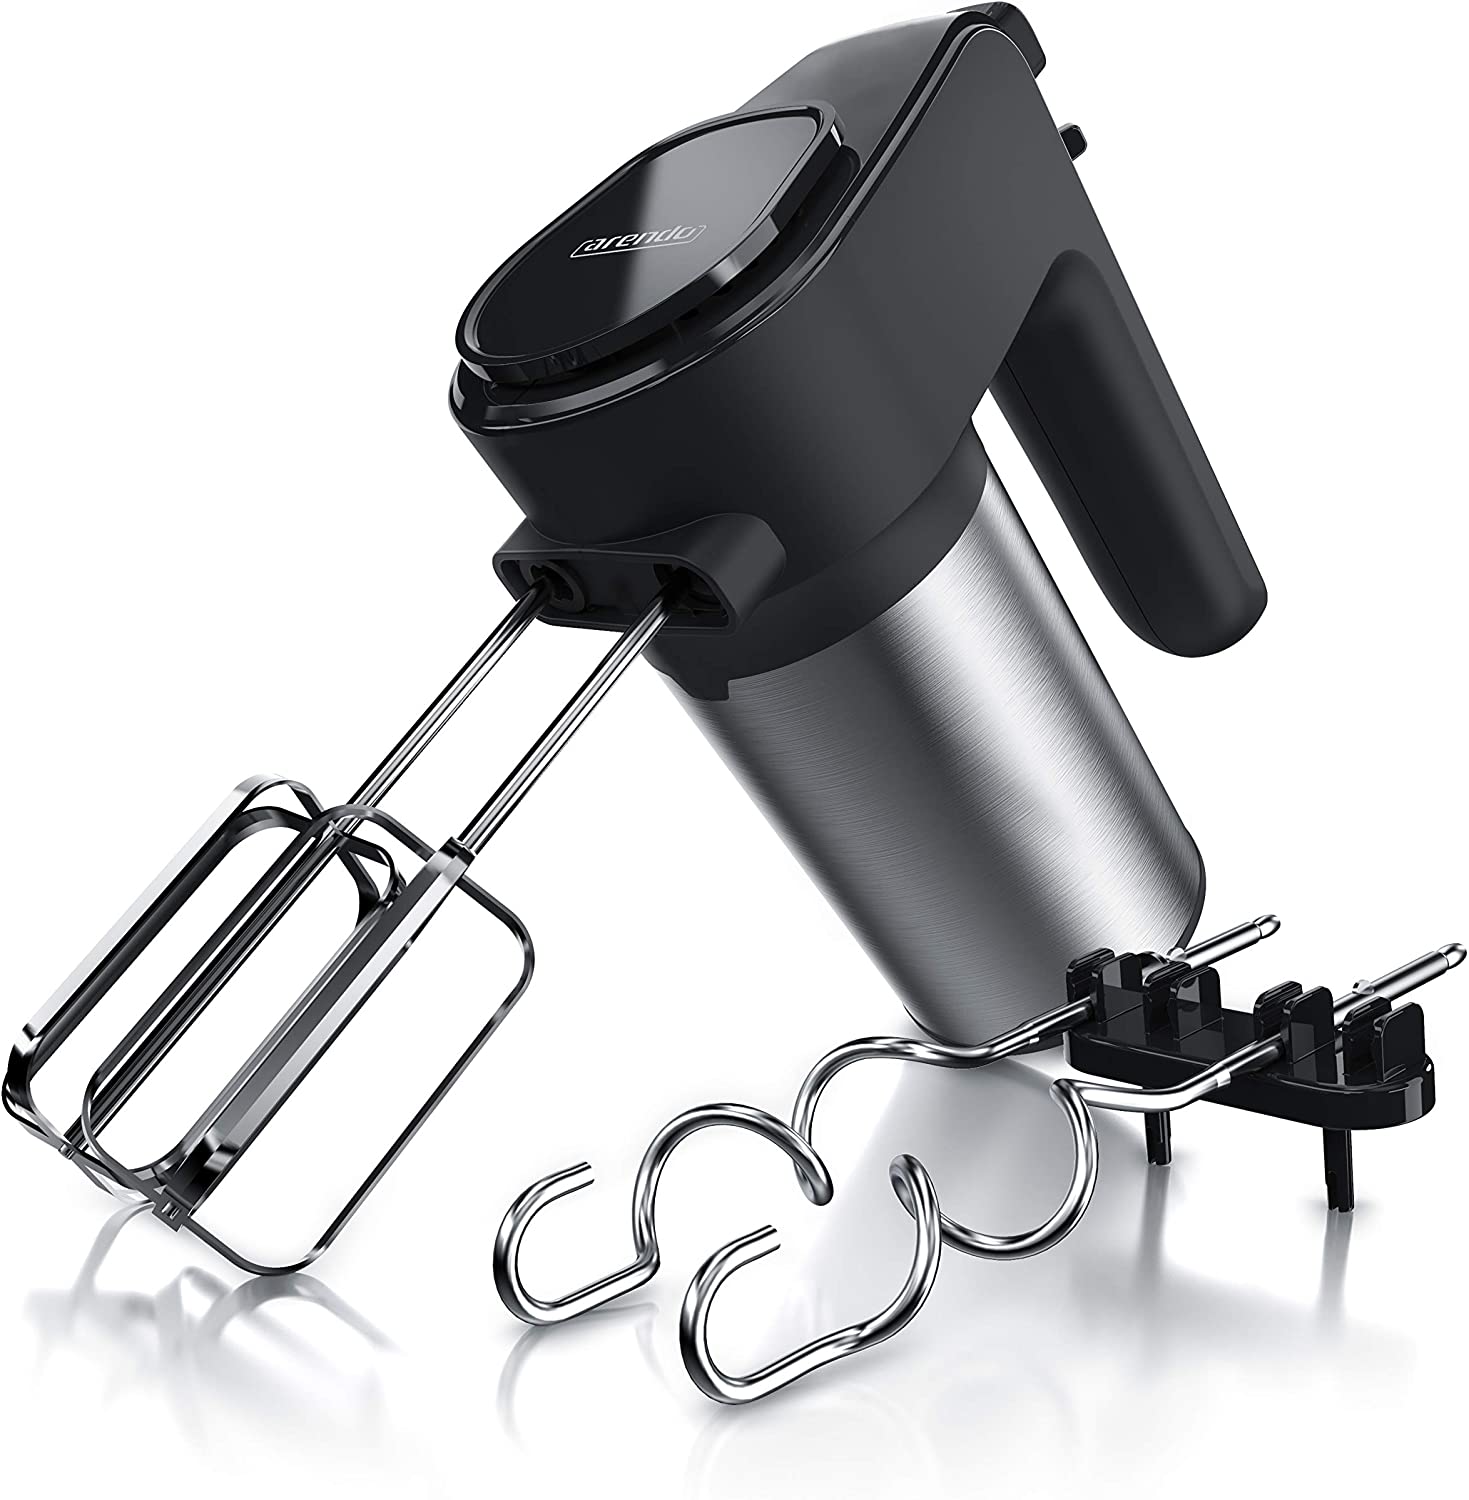 Arendo - Stainless steel hand mixer 400 W - electric hand mixer with 7 speeds including turbo function - electric purée rod - mixer set